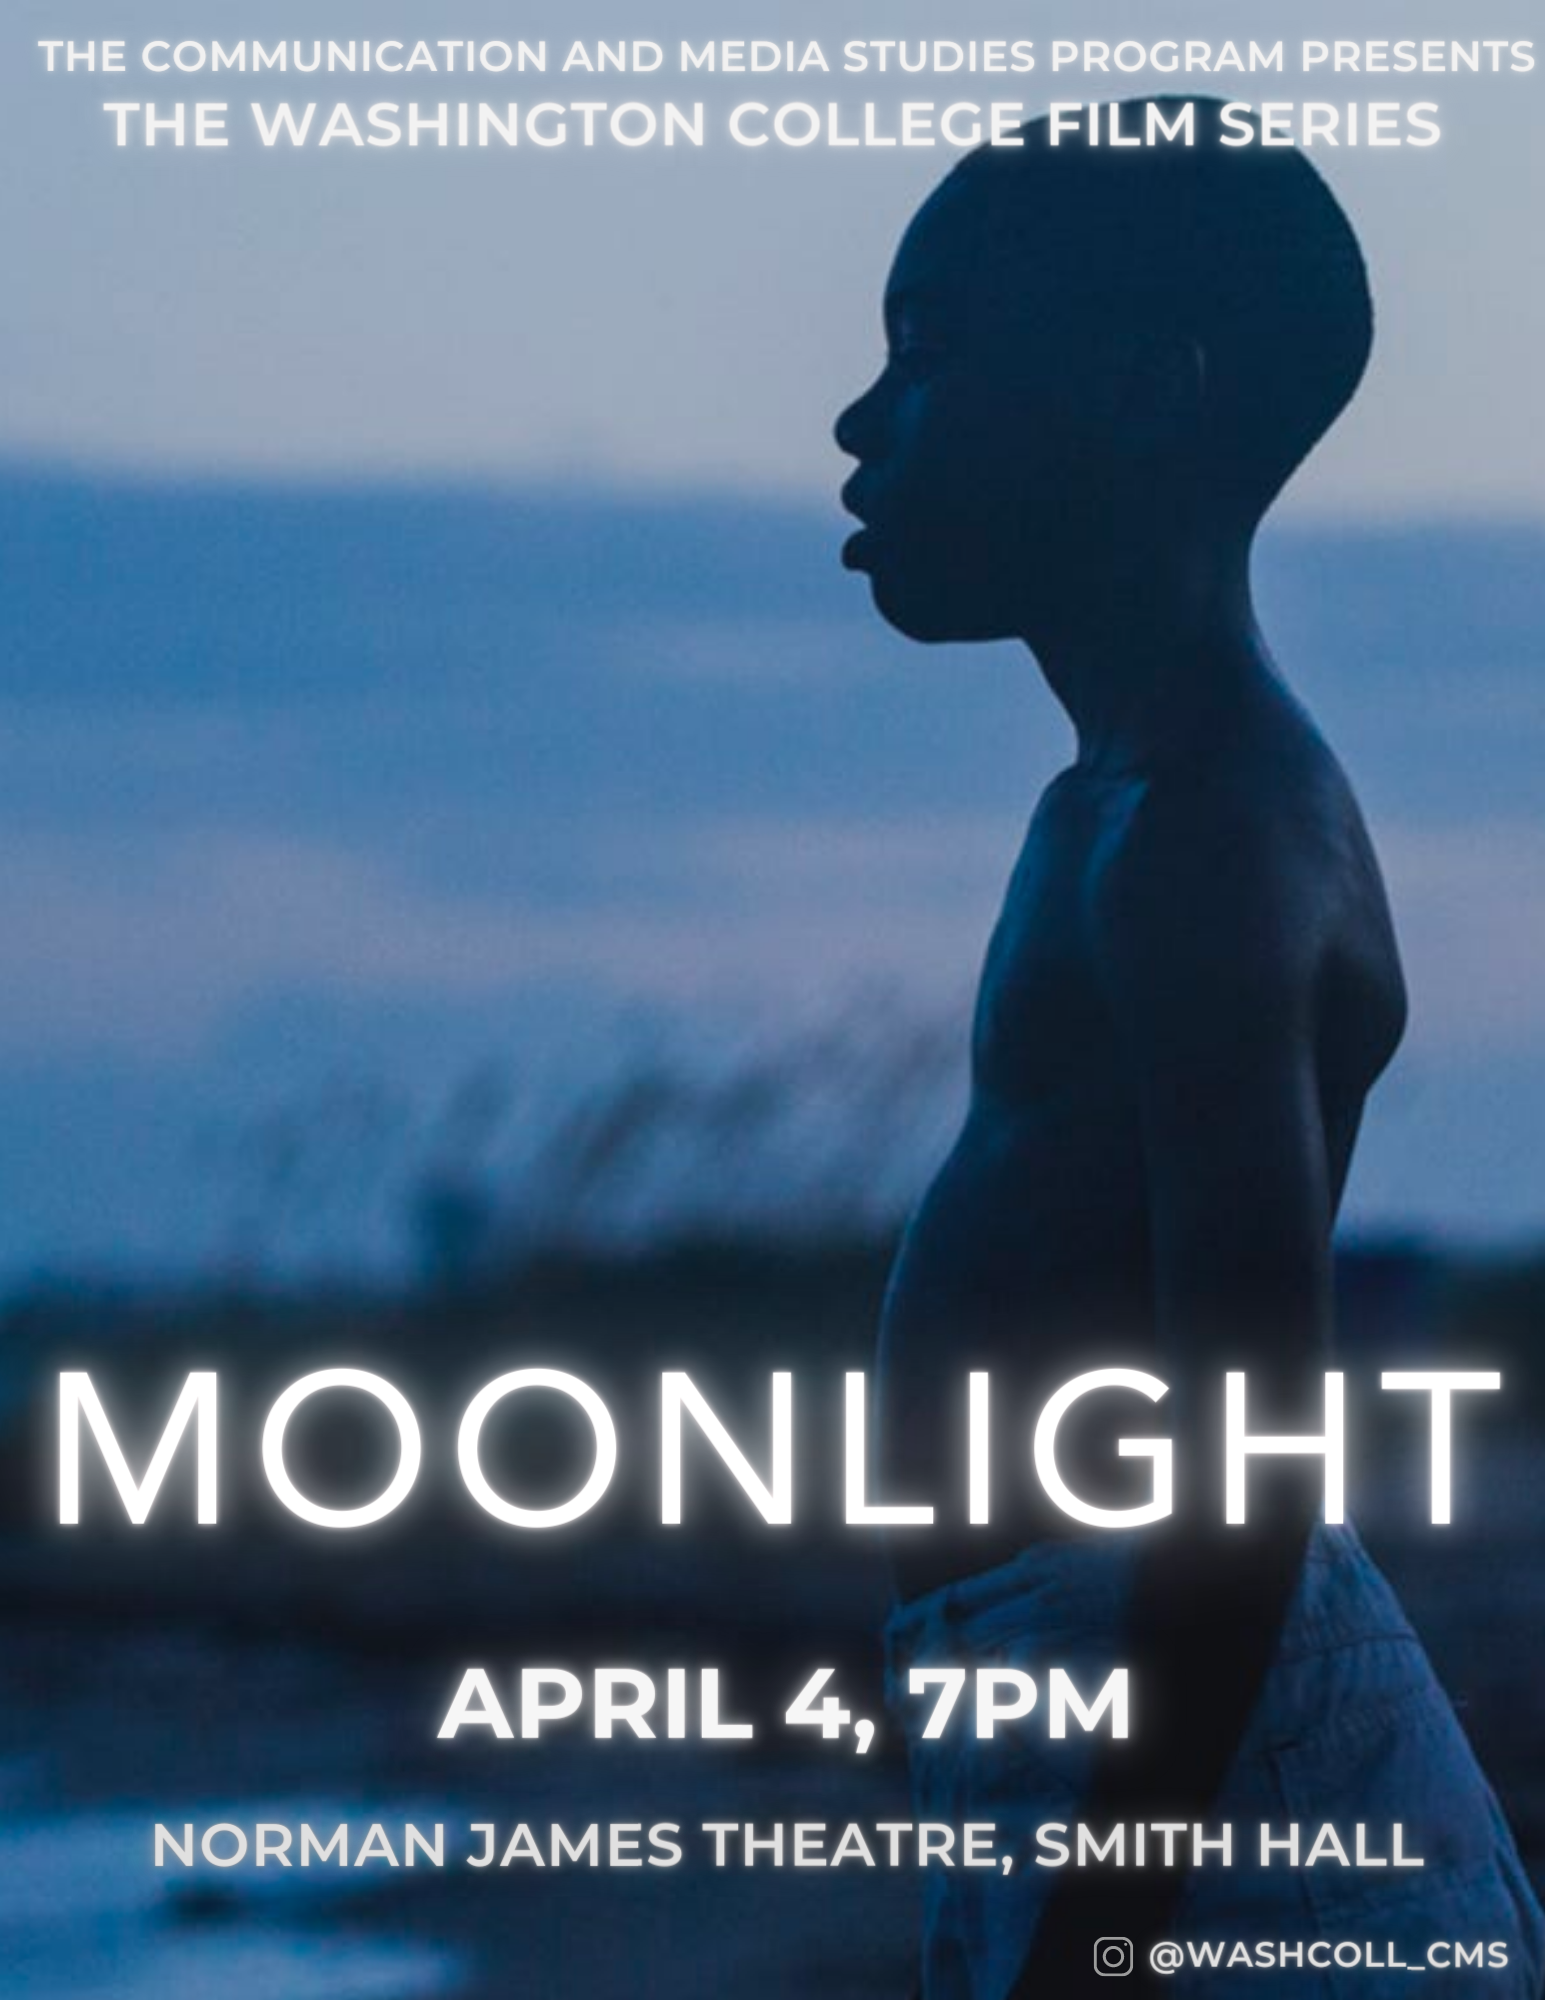  Movie poster for the film Moonlight